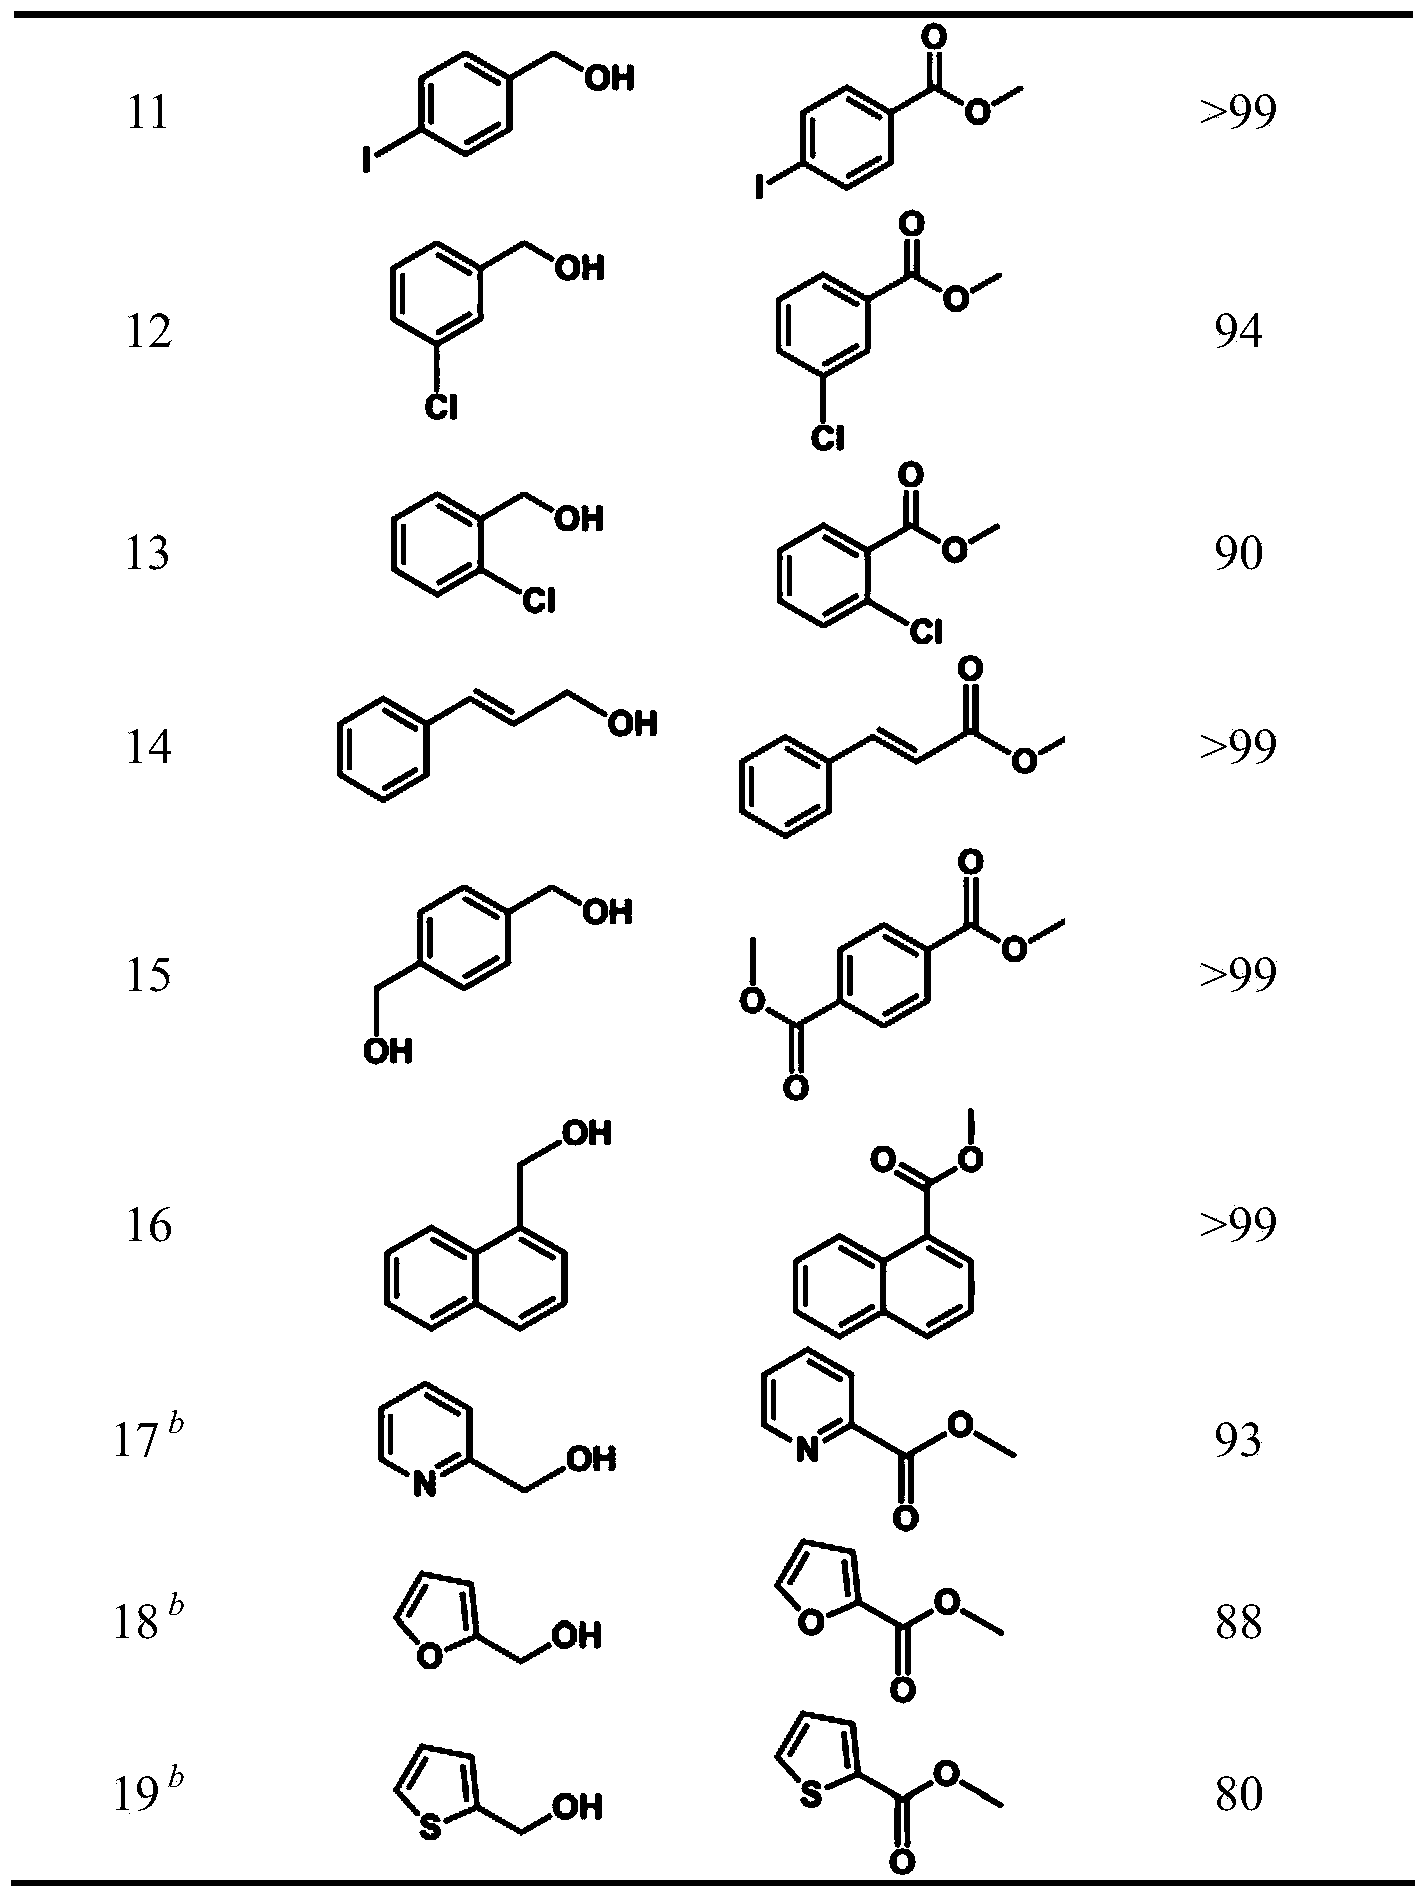 Cobalt-based catalyst for generating ester by alcohol oxidation, and preparation method and application of cobalt-based catalyst